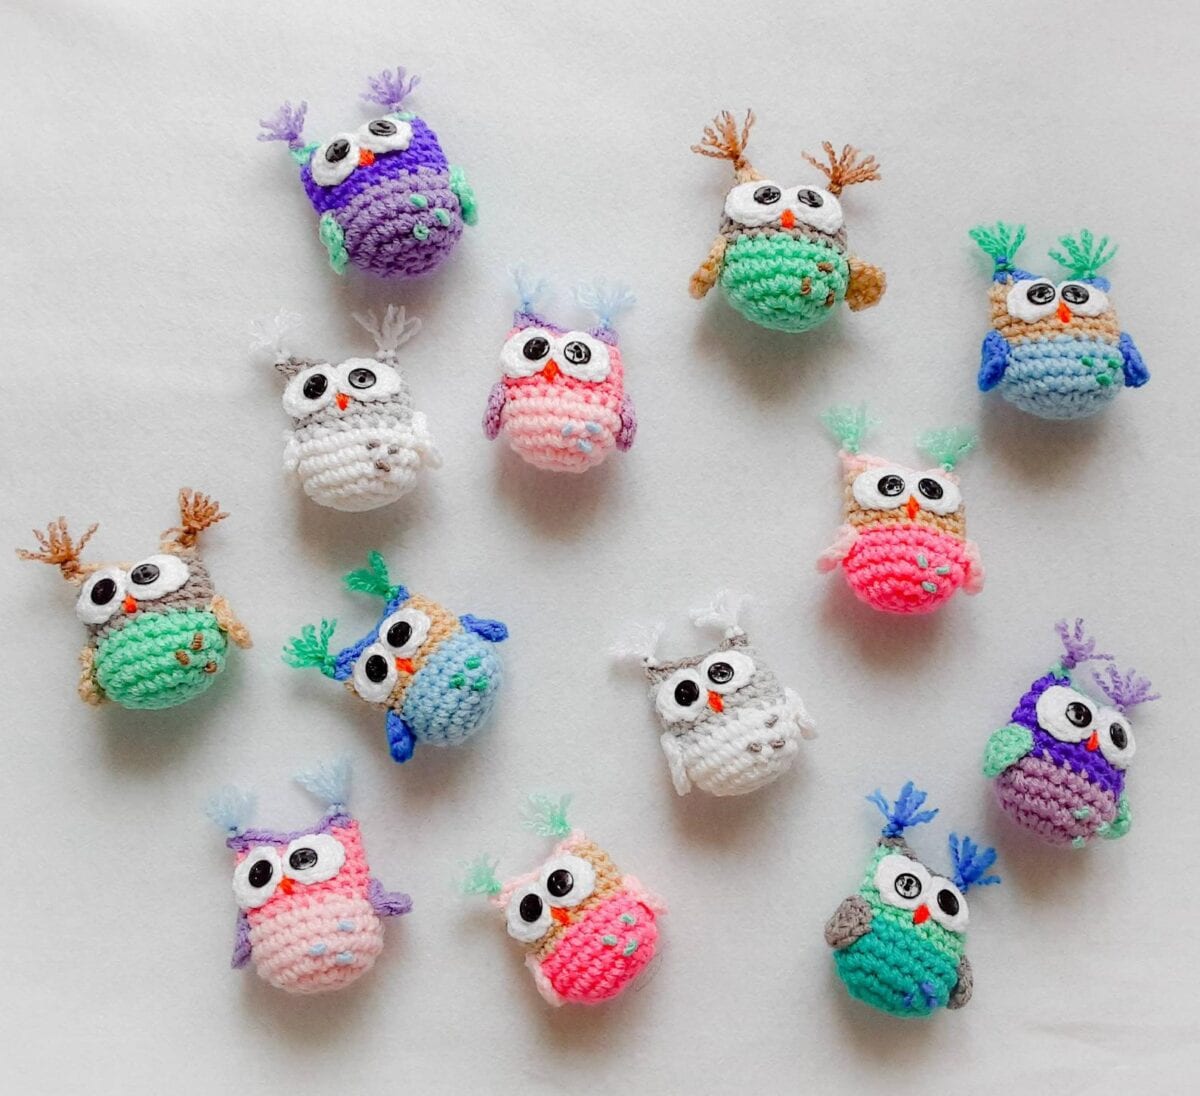 You Can Get Miniture Crocheted Owls And I’m Going To Need One Of Each Color